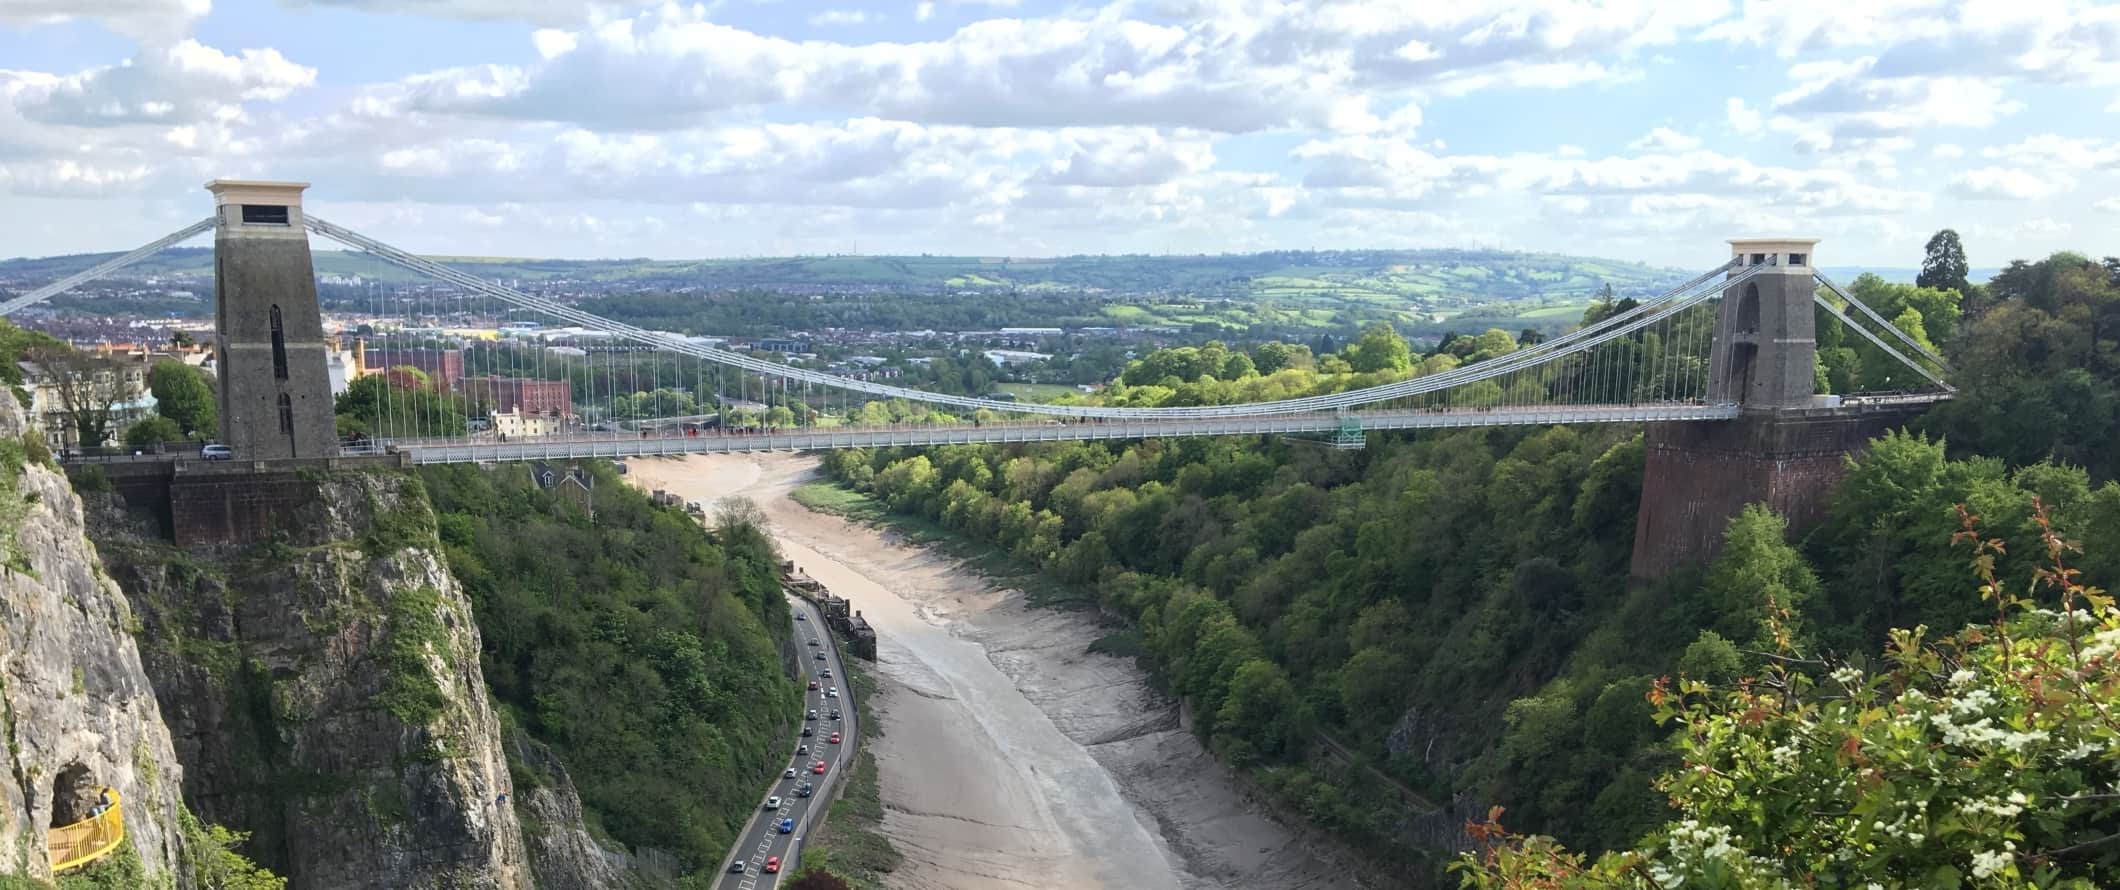 View over the Clifton Suspension Bridge over the river in Bristol, England